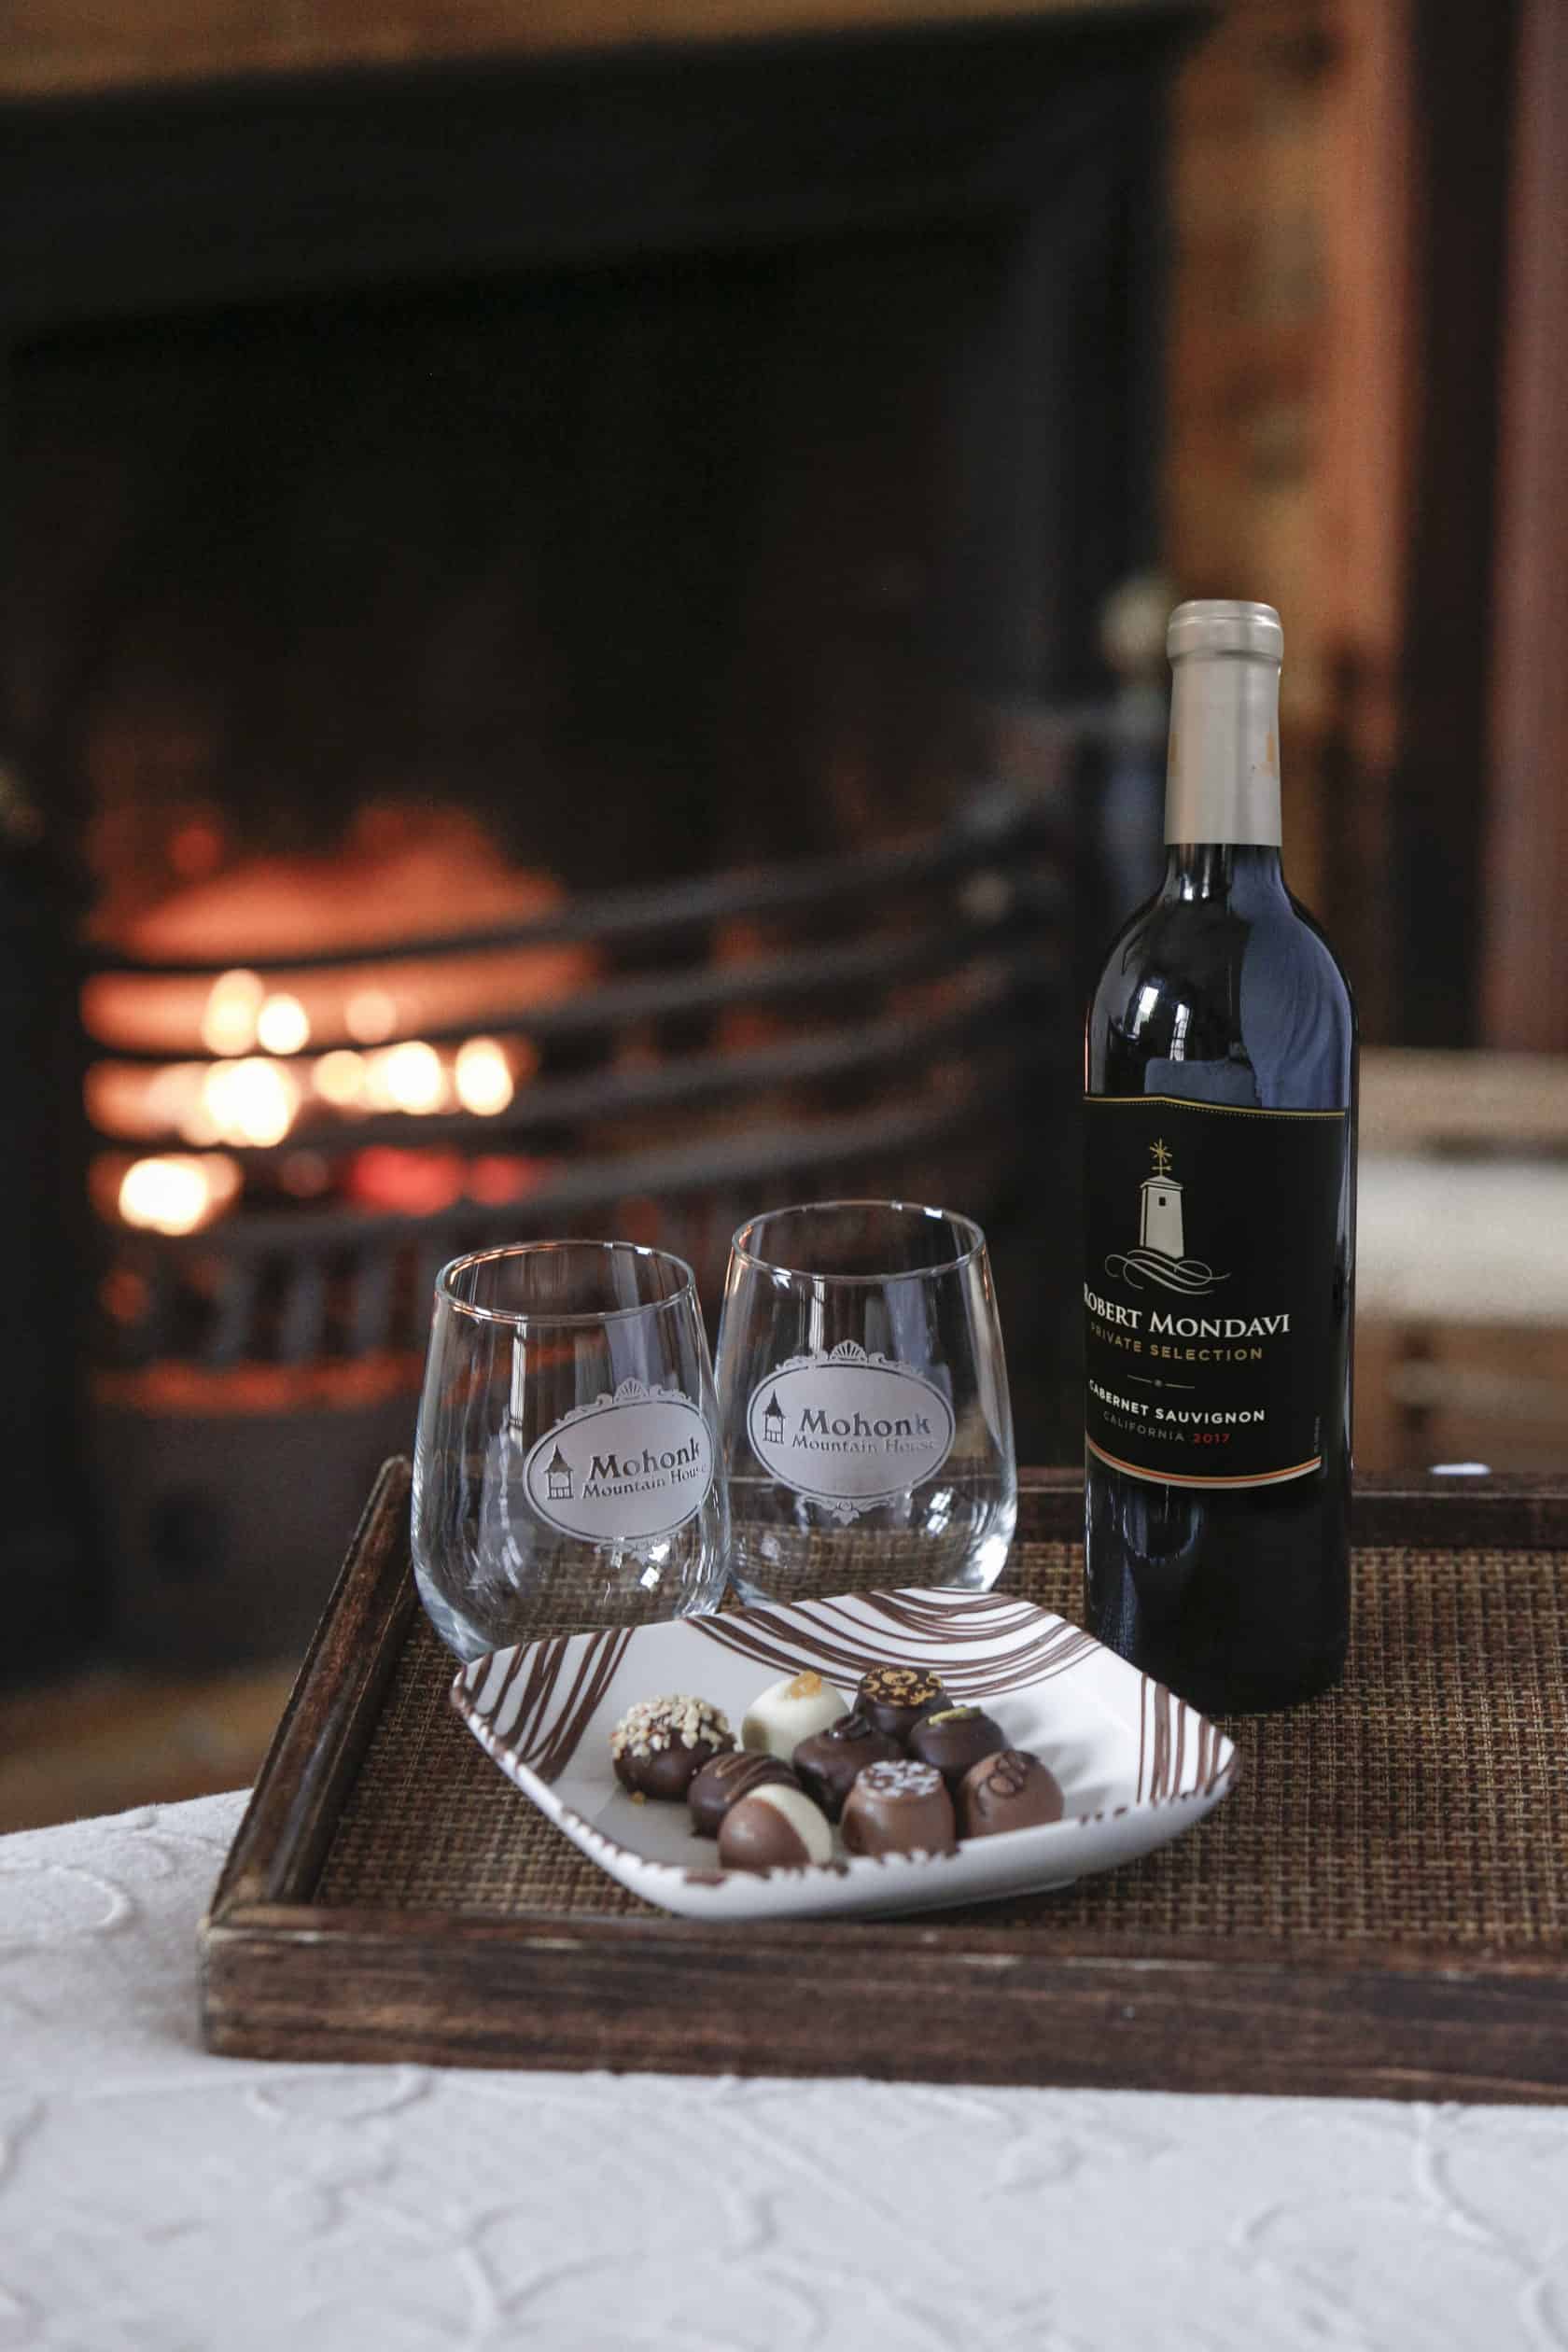 chocolates and wine by fireplace